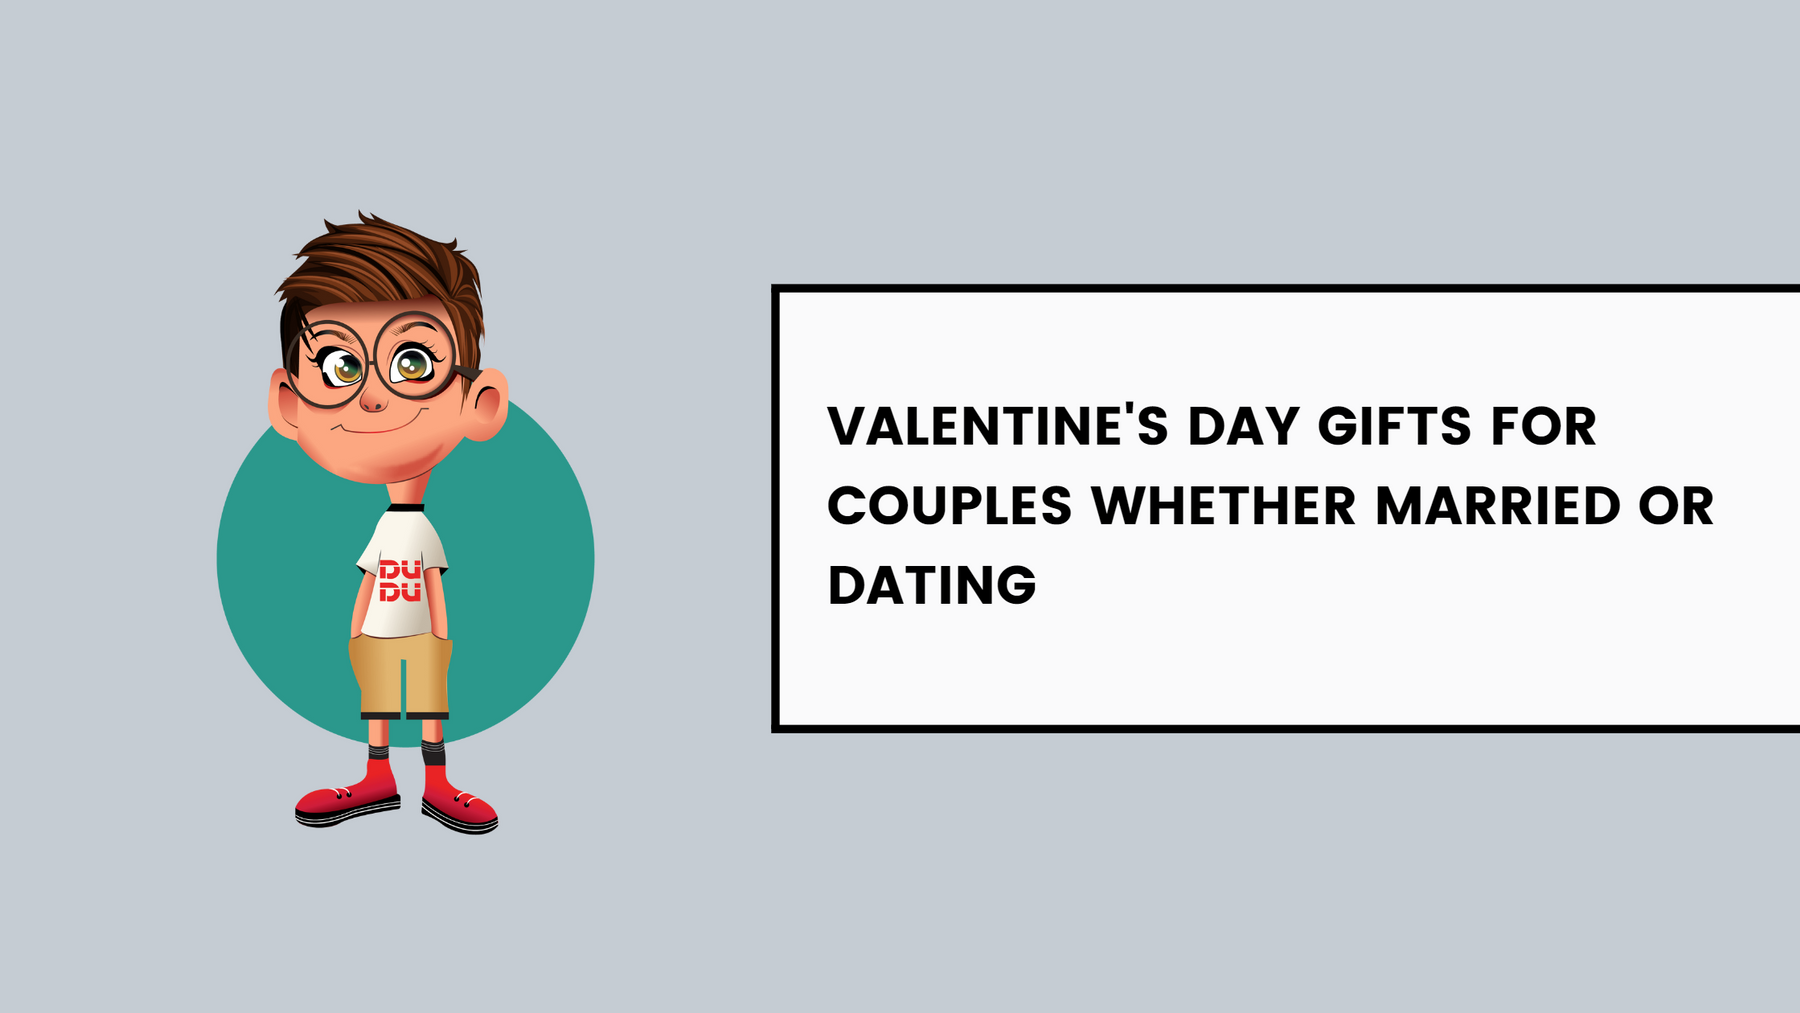 Valentine's Day Gifts for Couples Whether Married or Dating